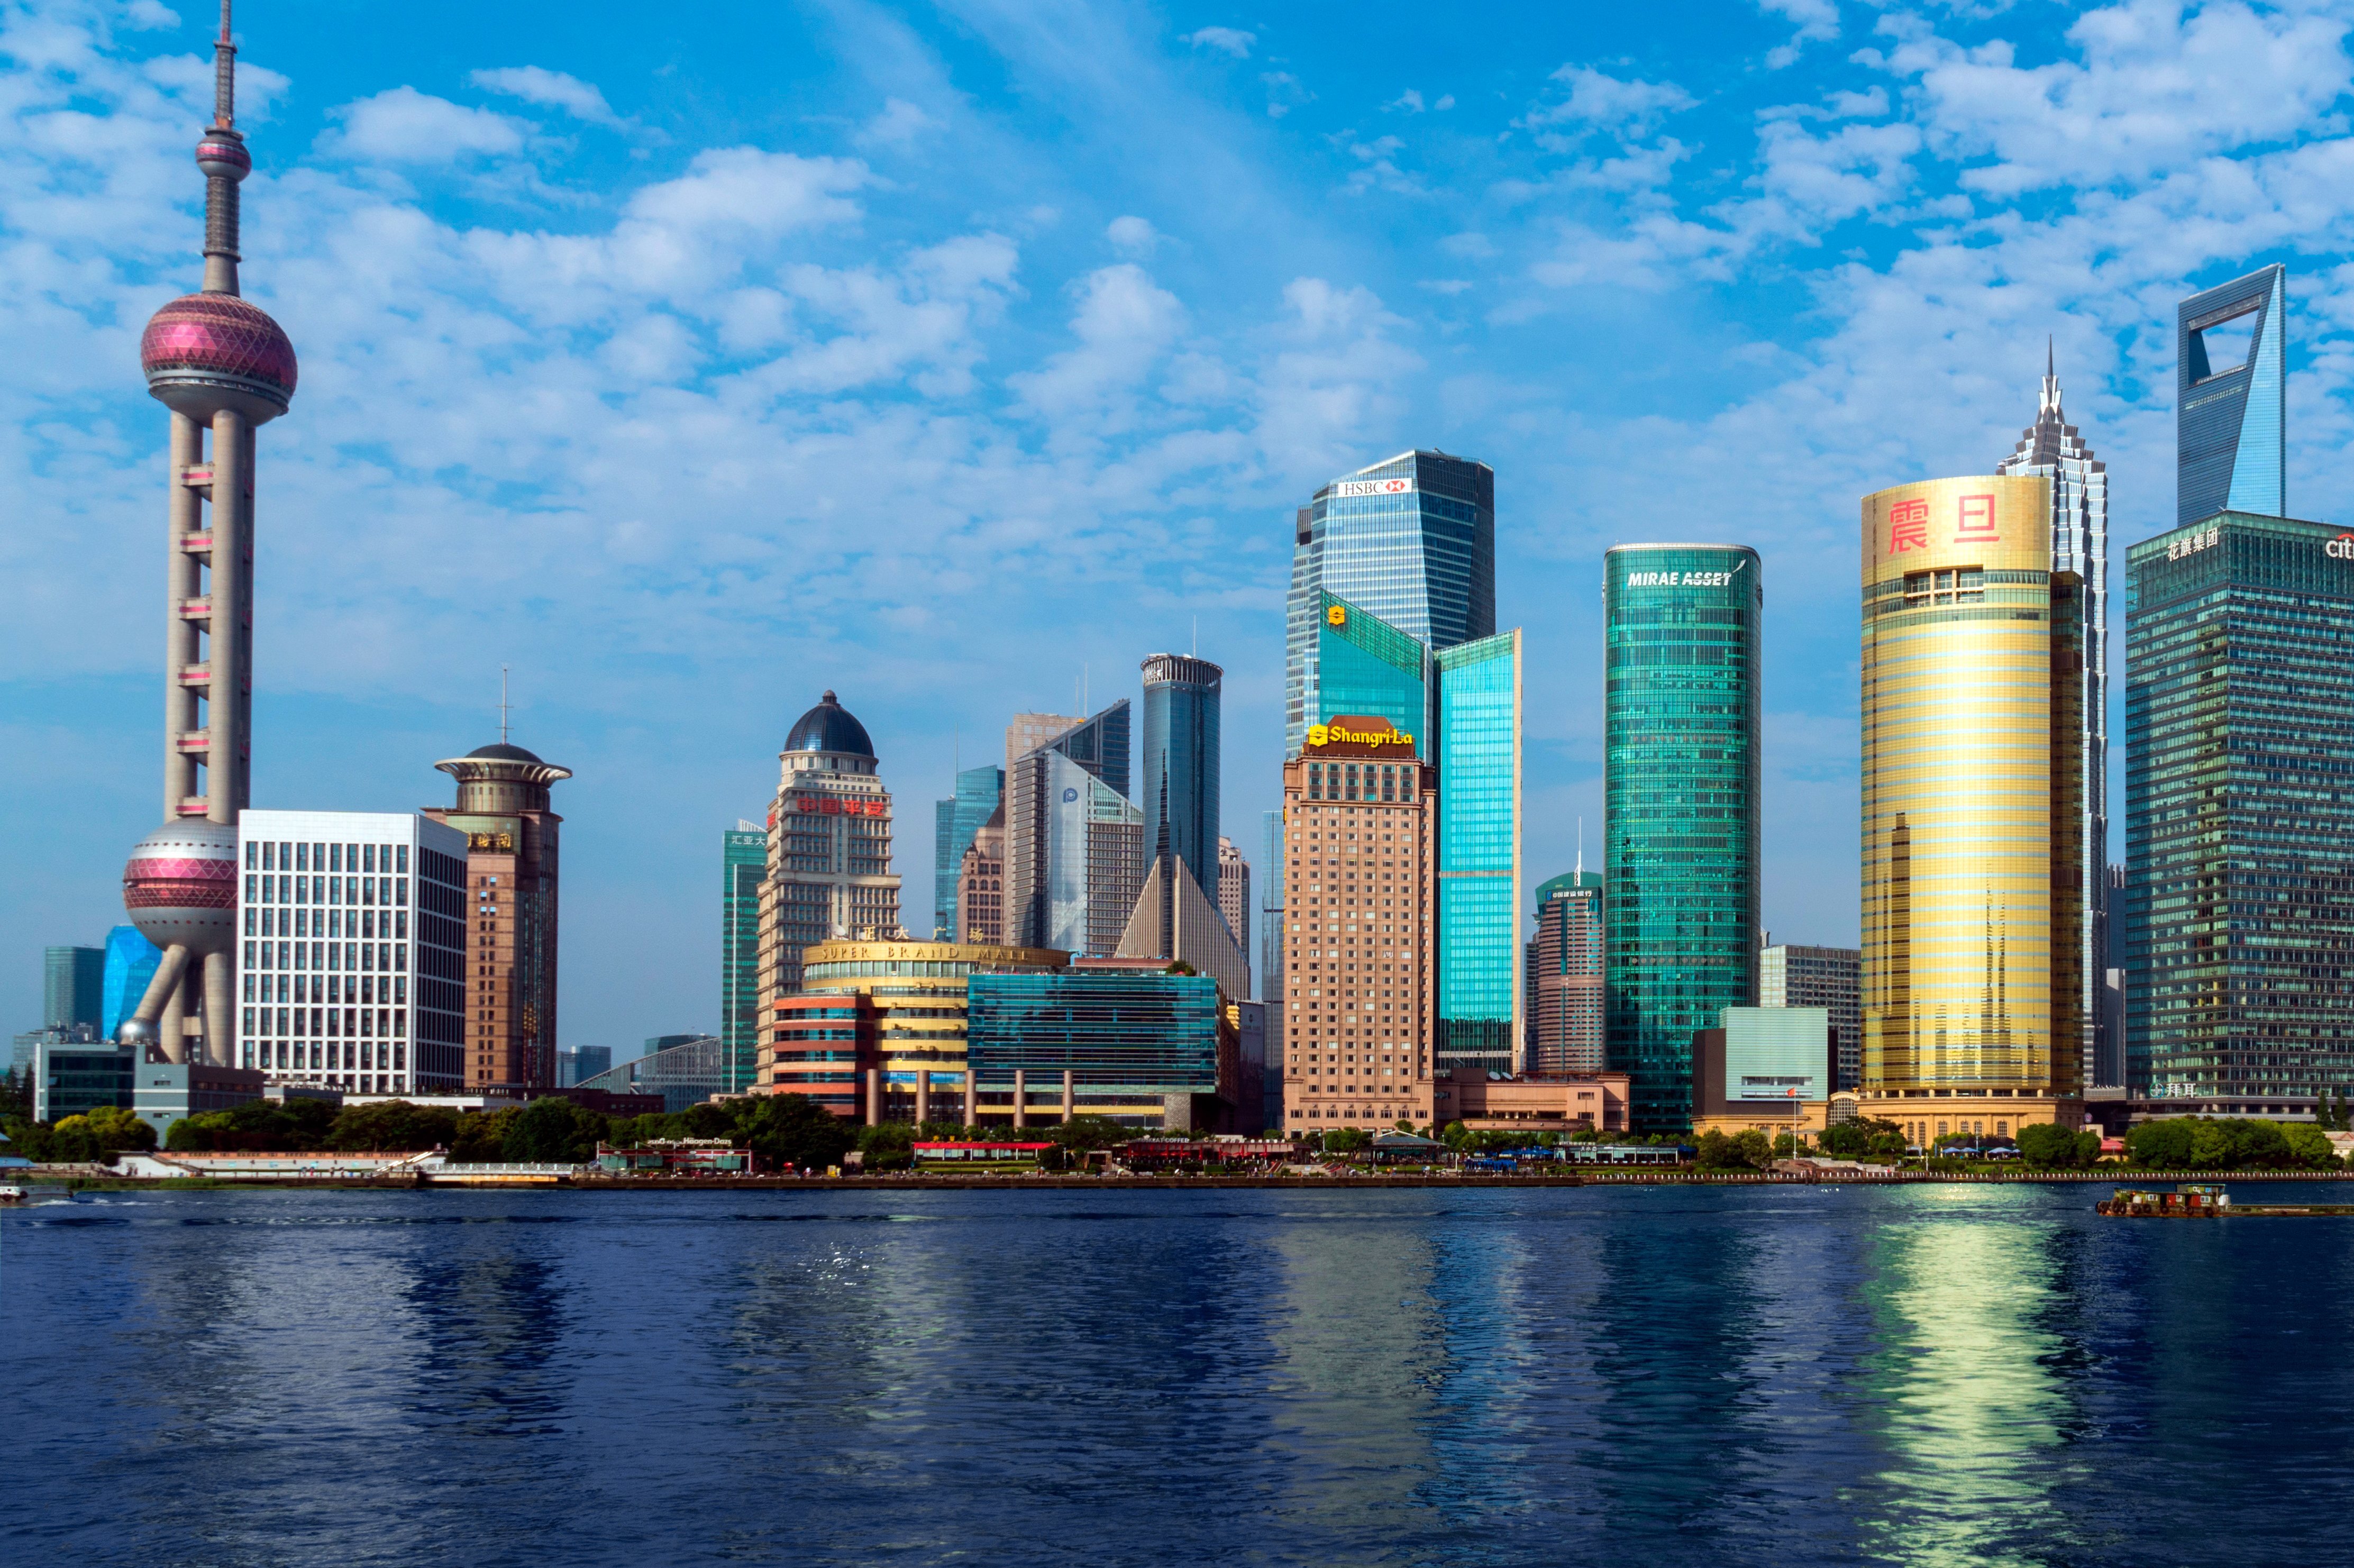 The image shows the skyline of shanghai